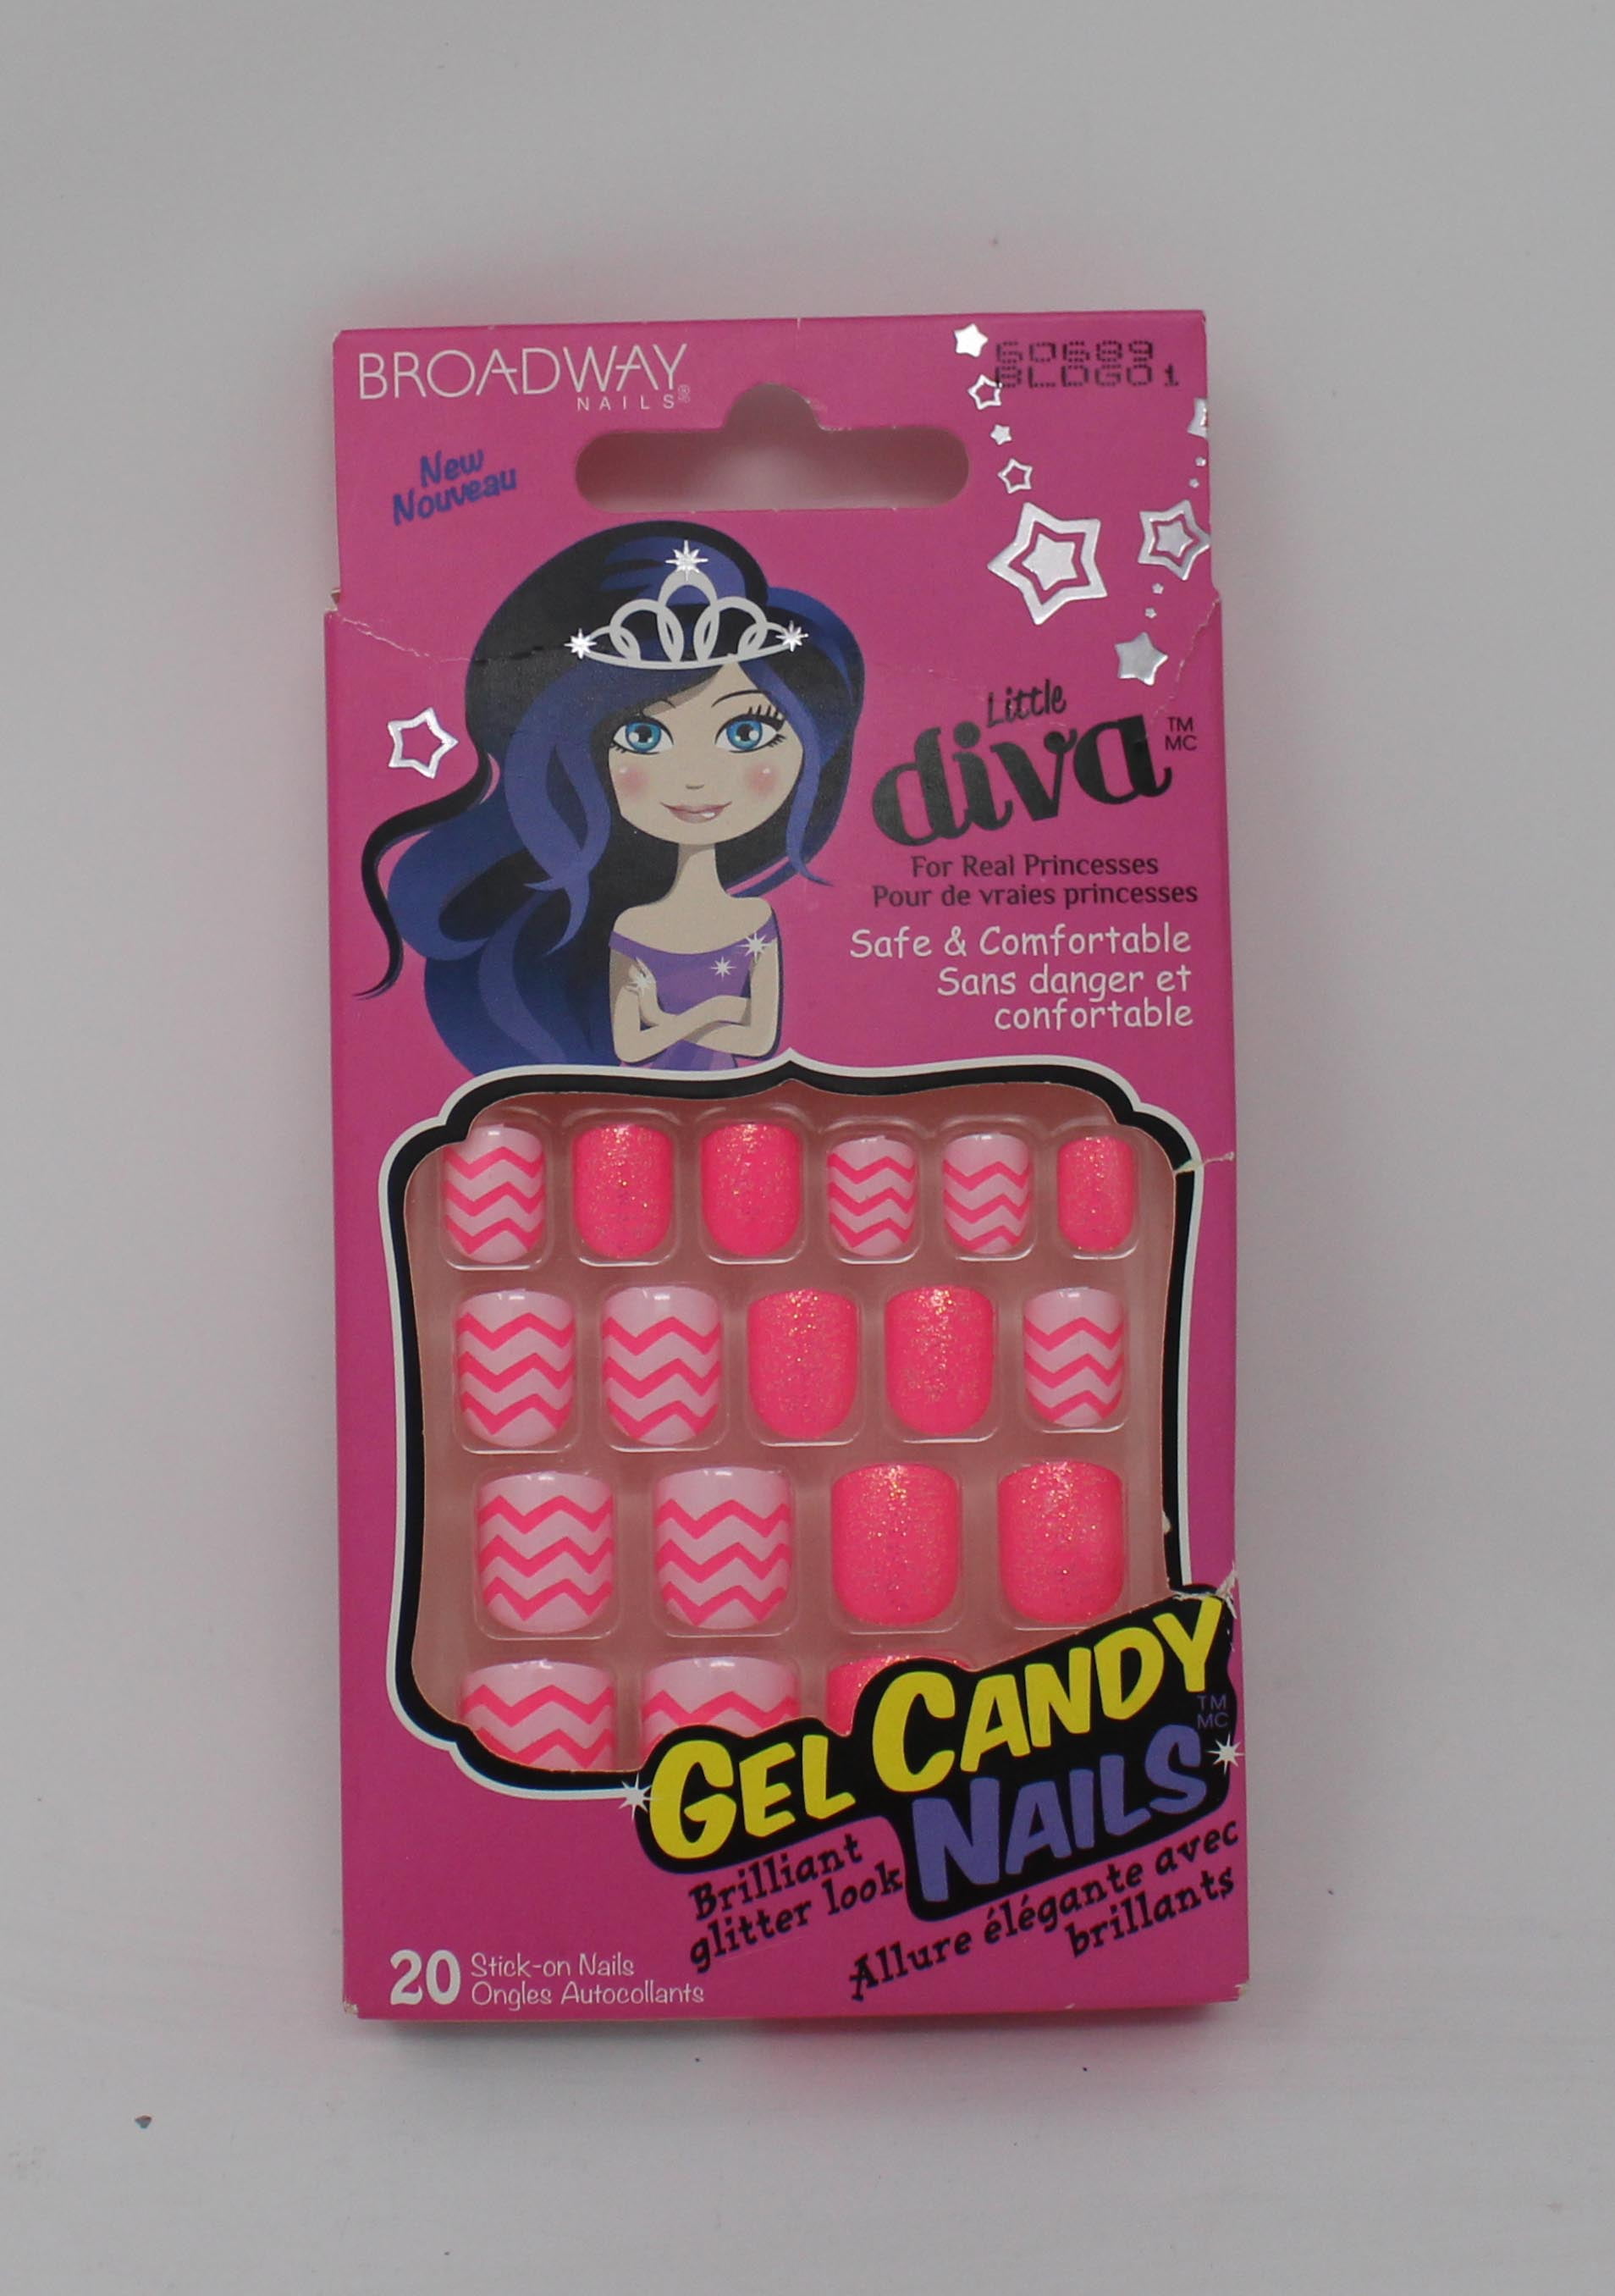 Broadway Nails Little Diva Gel Candy Nails : Buy Online at Best Price in  KSA - Souq is now Amazon.sa: Beauty